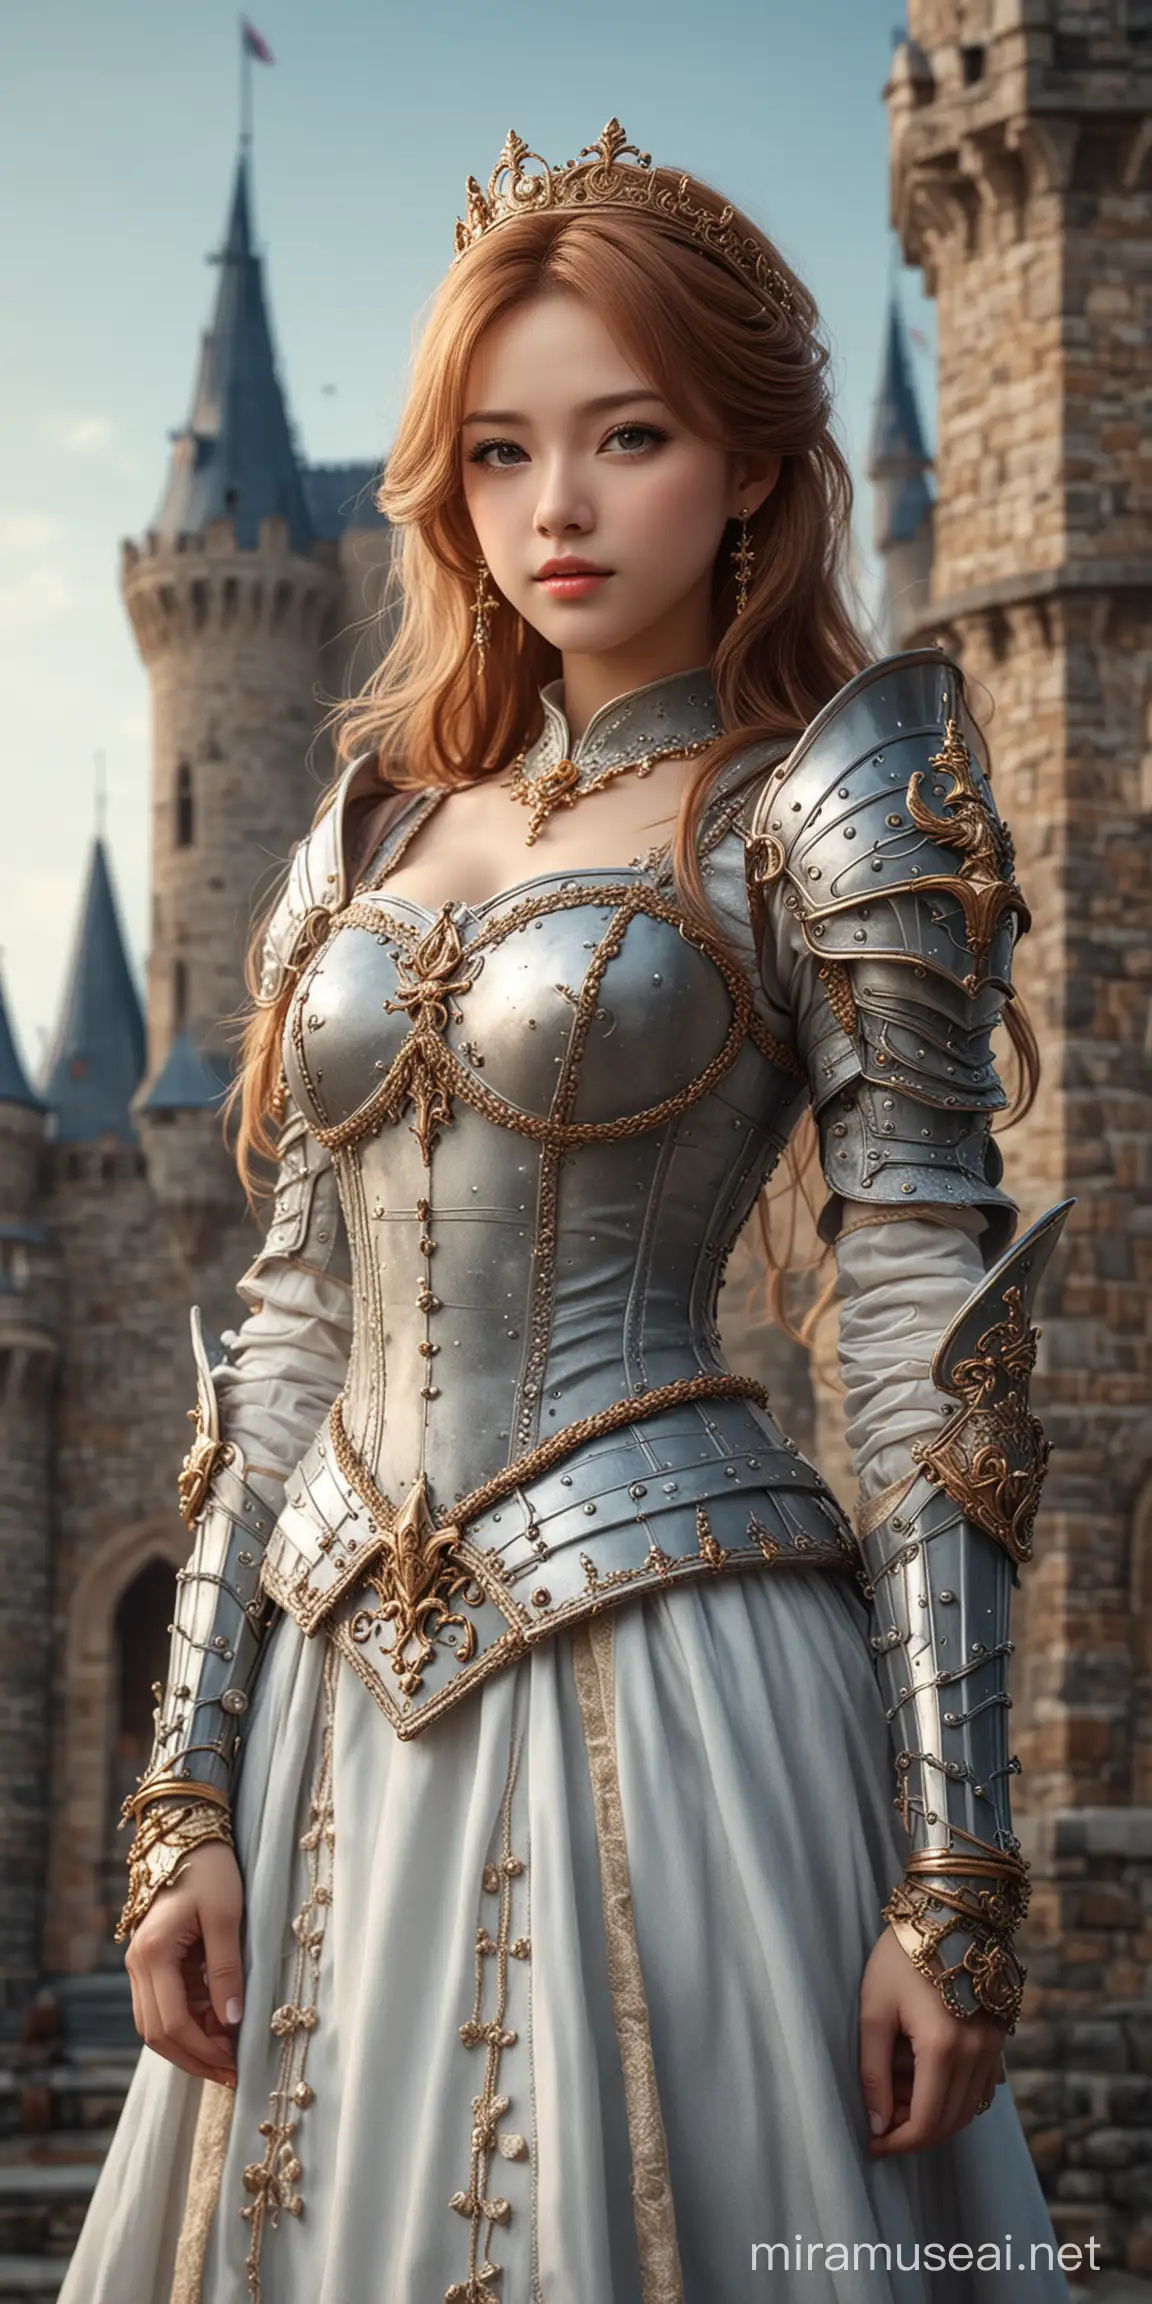 Elegant Knight and Idol Beauty in a Castle